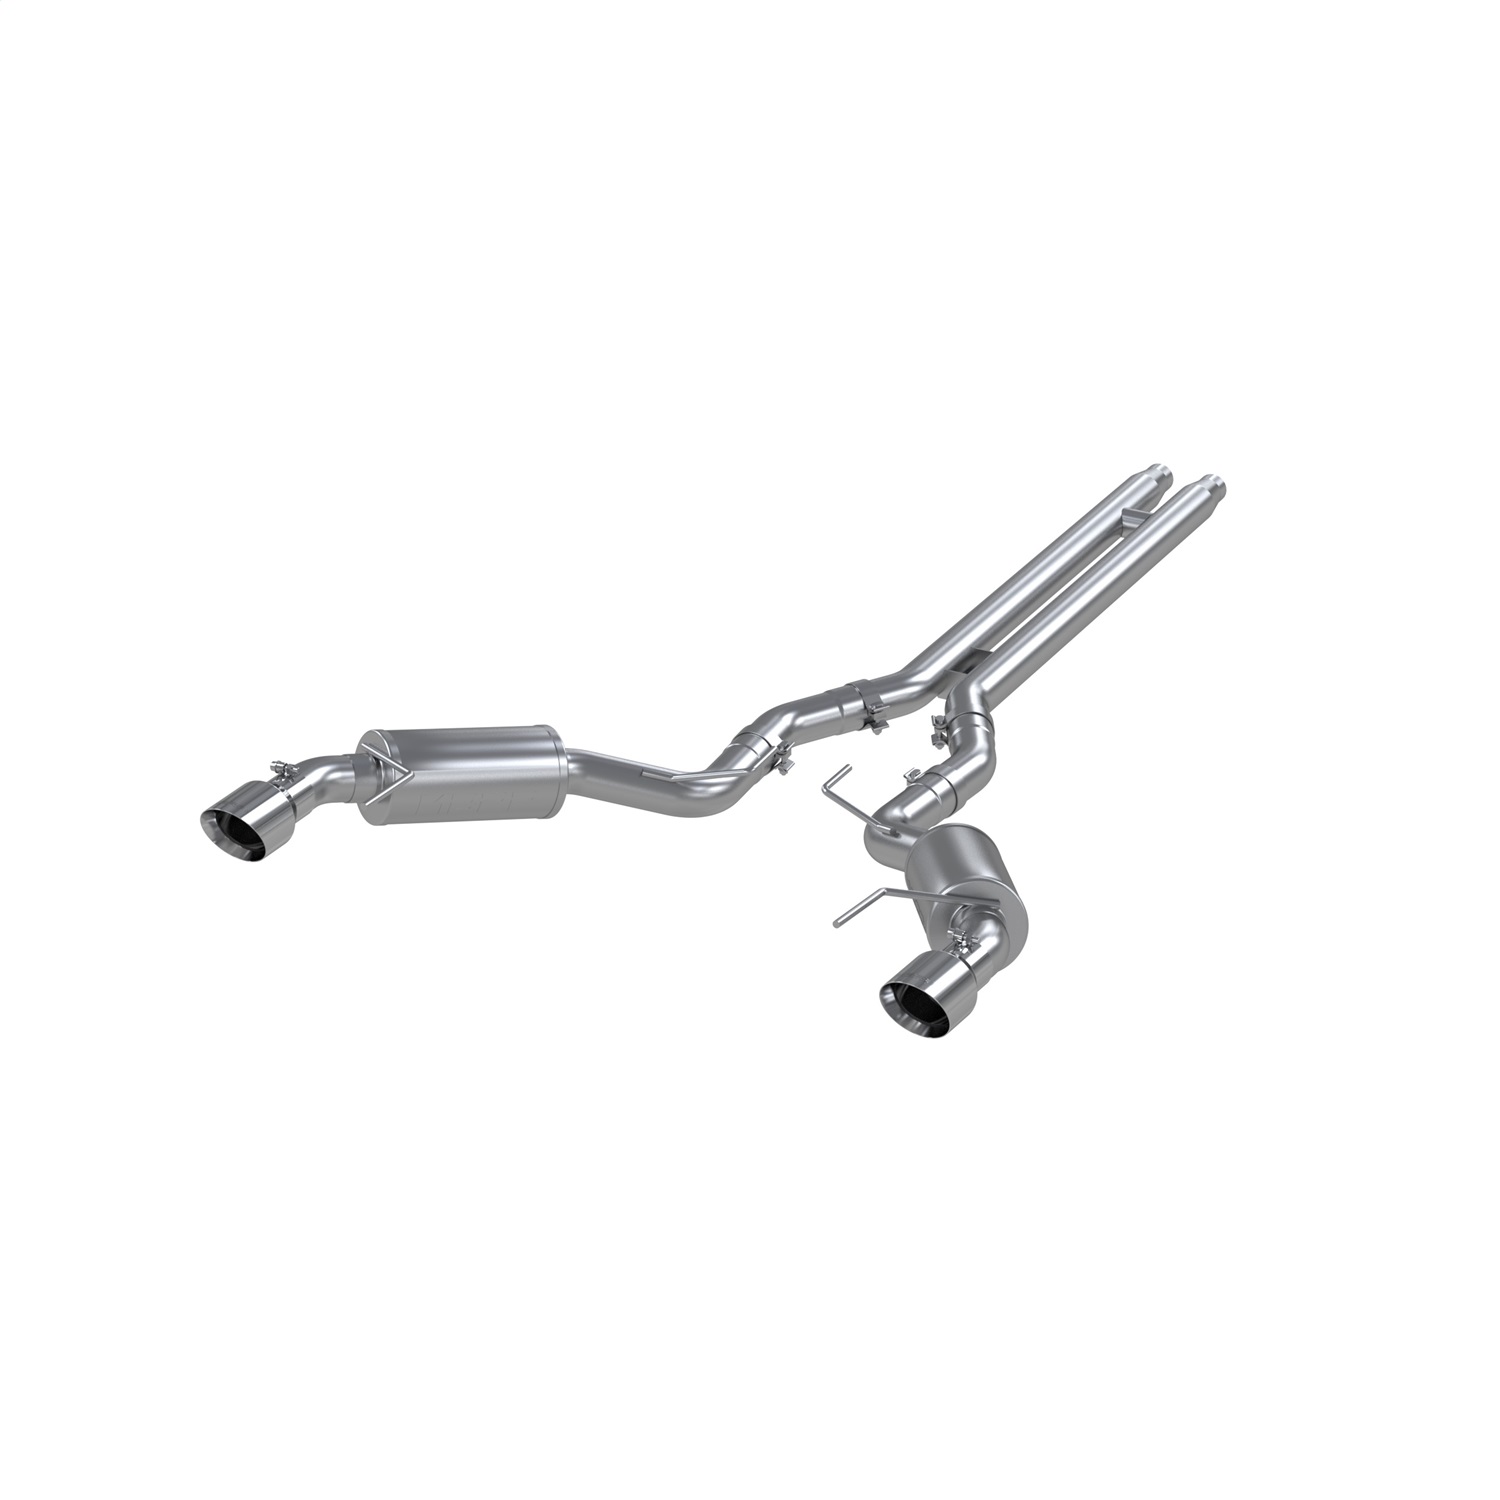 MBRP Exhaust S7277AL Armor Lite Cat Back Exhaust System Fits 15-17 Mustang